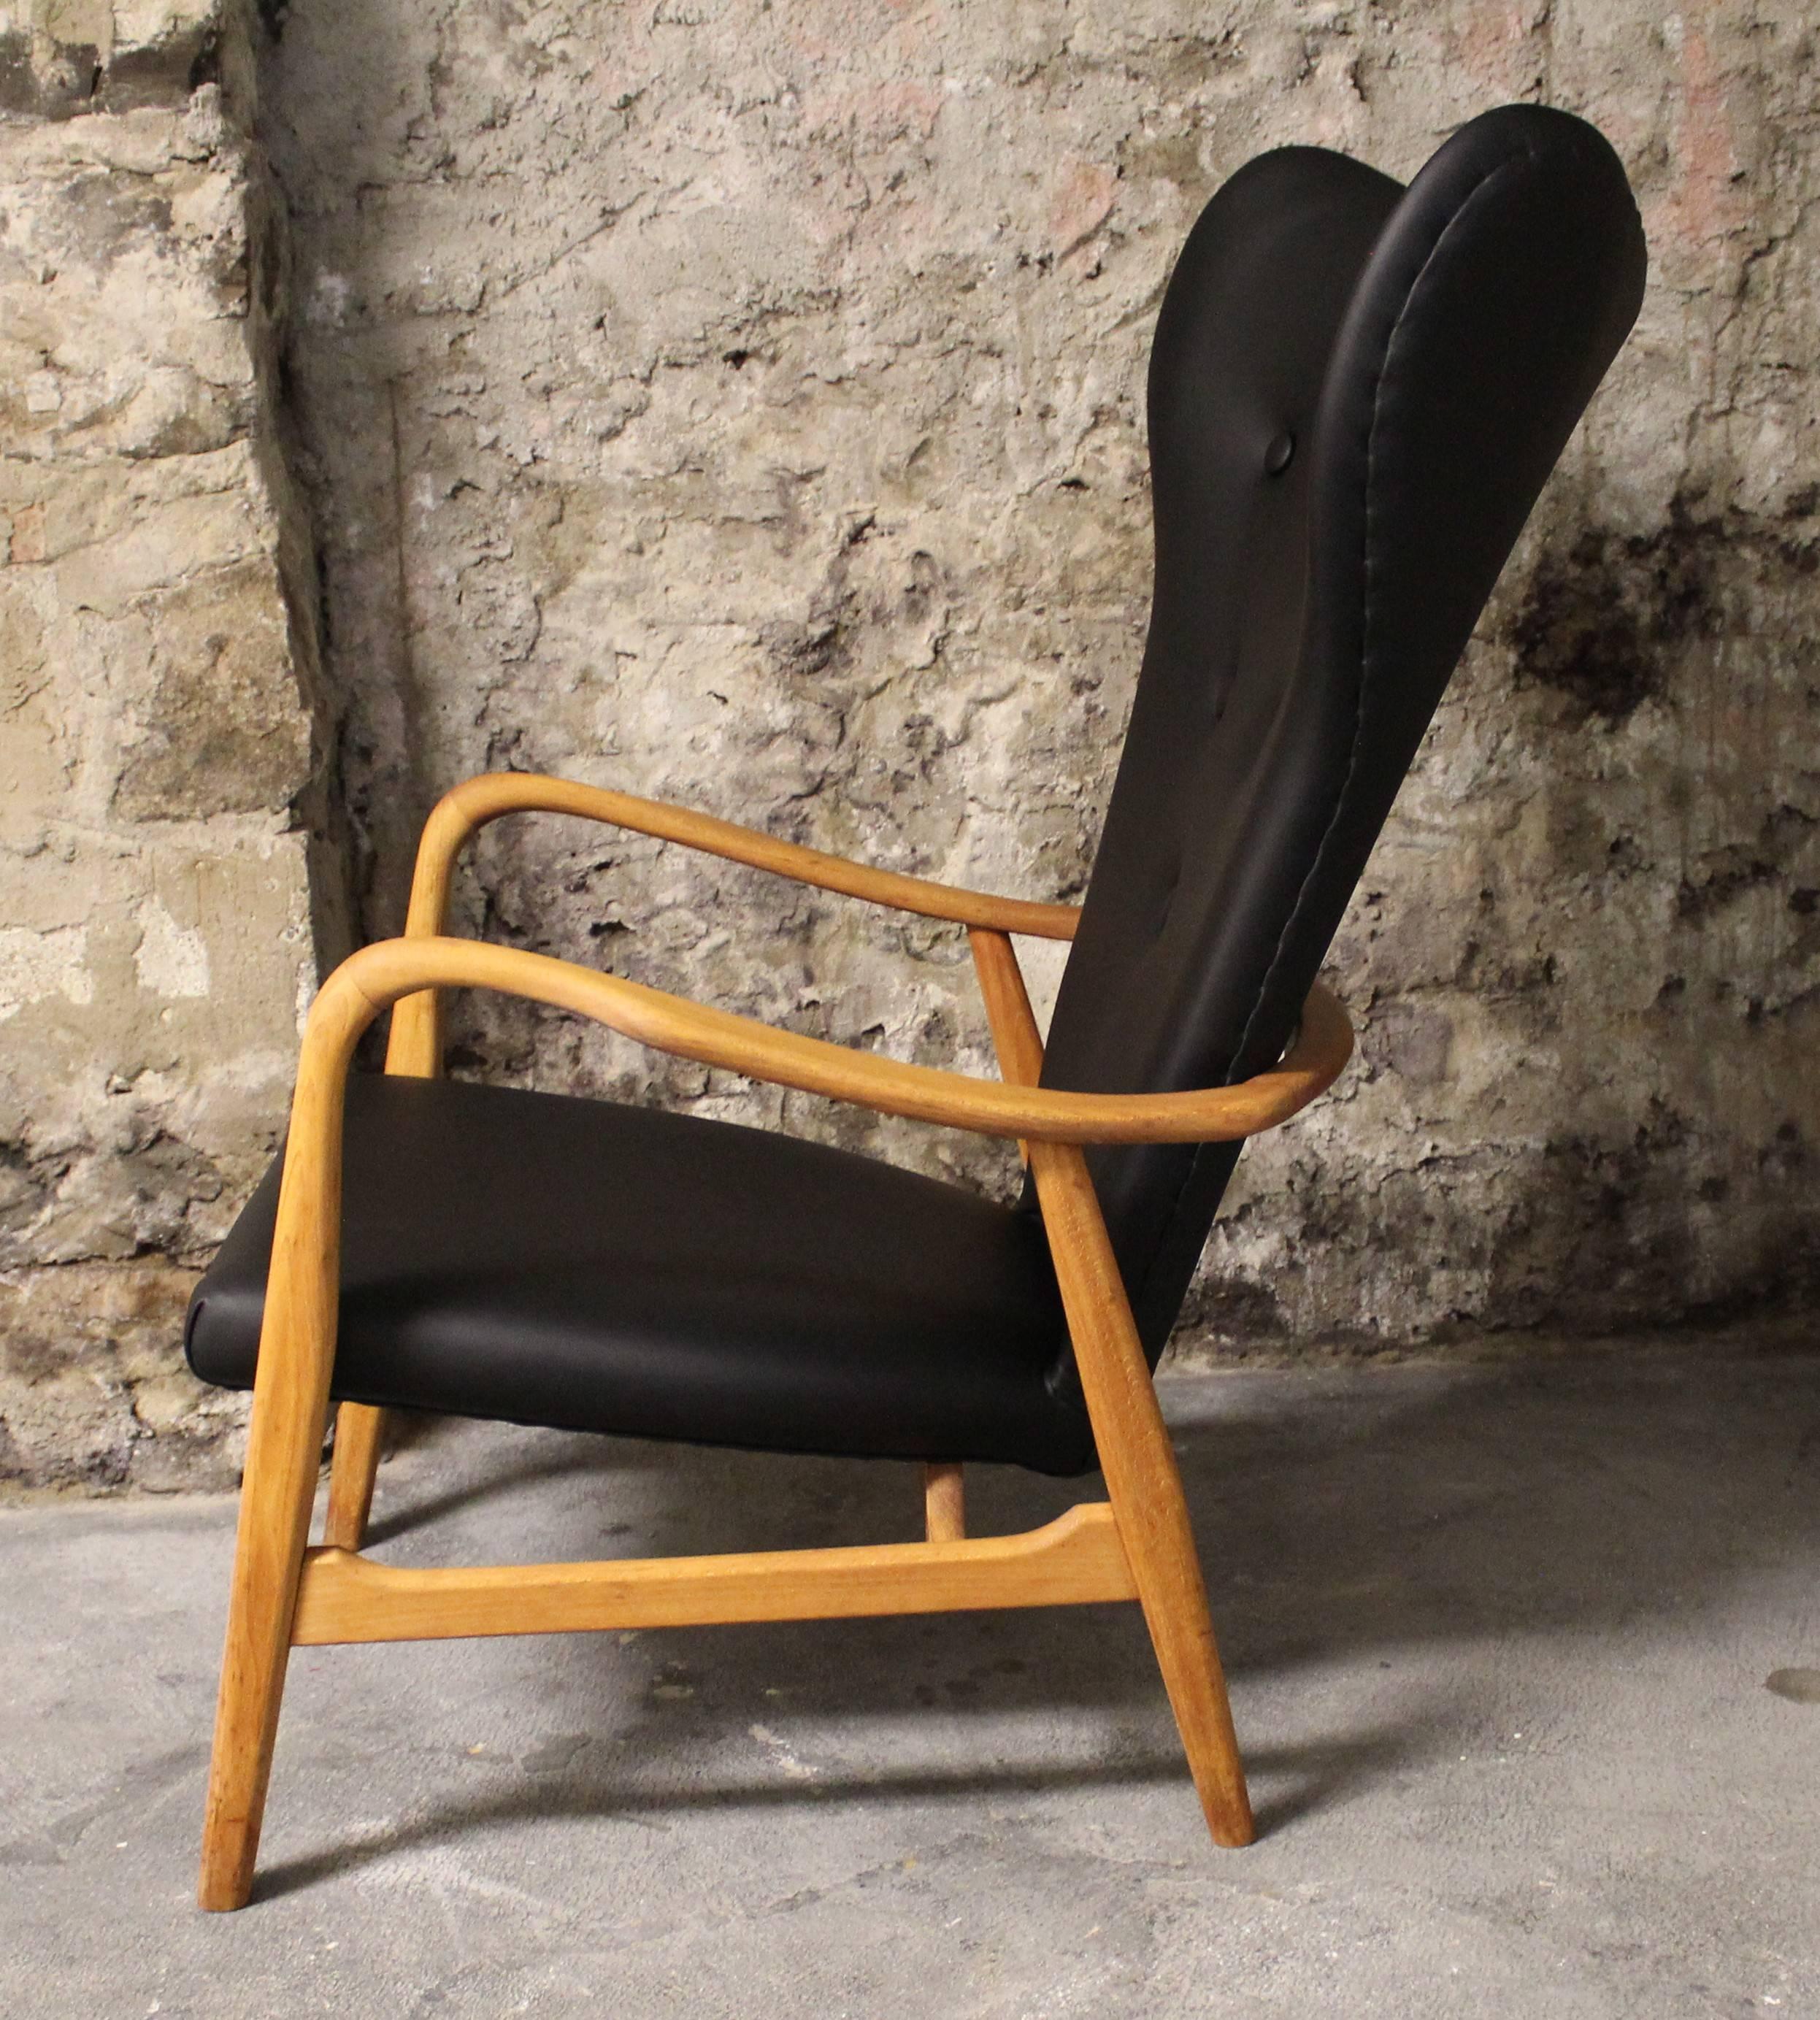 This easy chair was designed by Acton Schubell and IB Madsen in the 1950s. It features a beech frame and is newly upholstered in leather.

Scandinavian Modern/Mid-Century Modern.